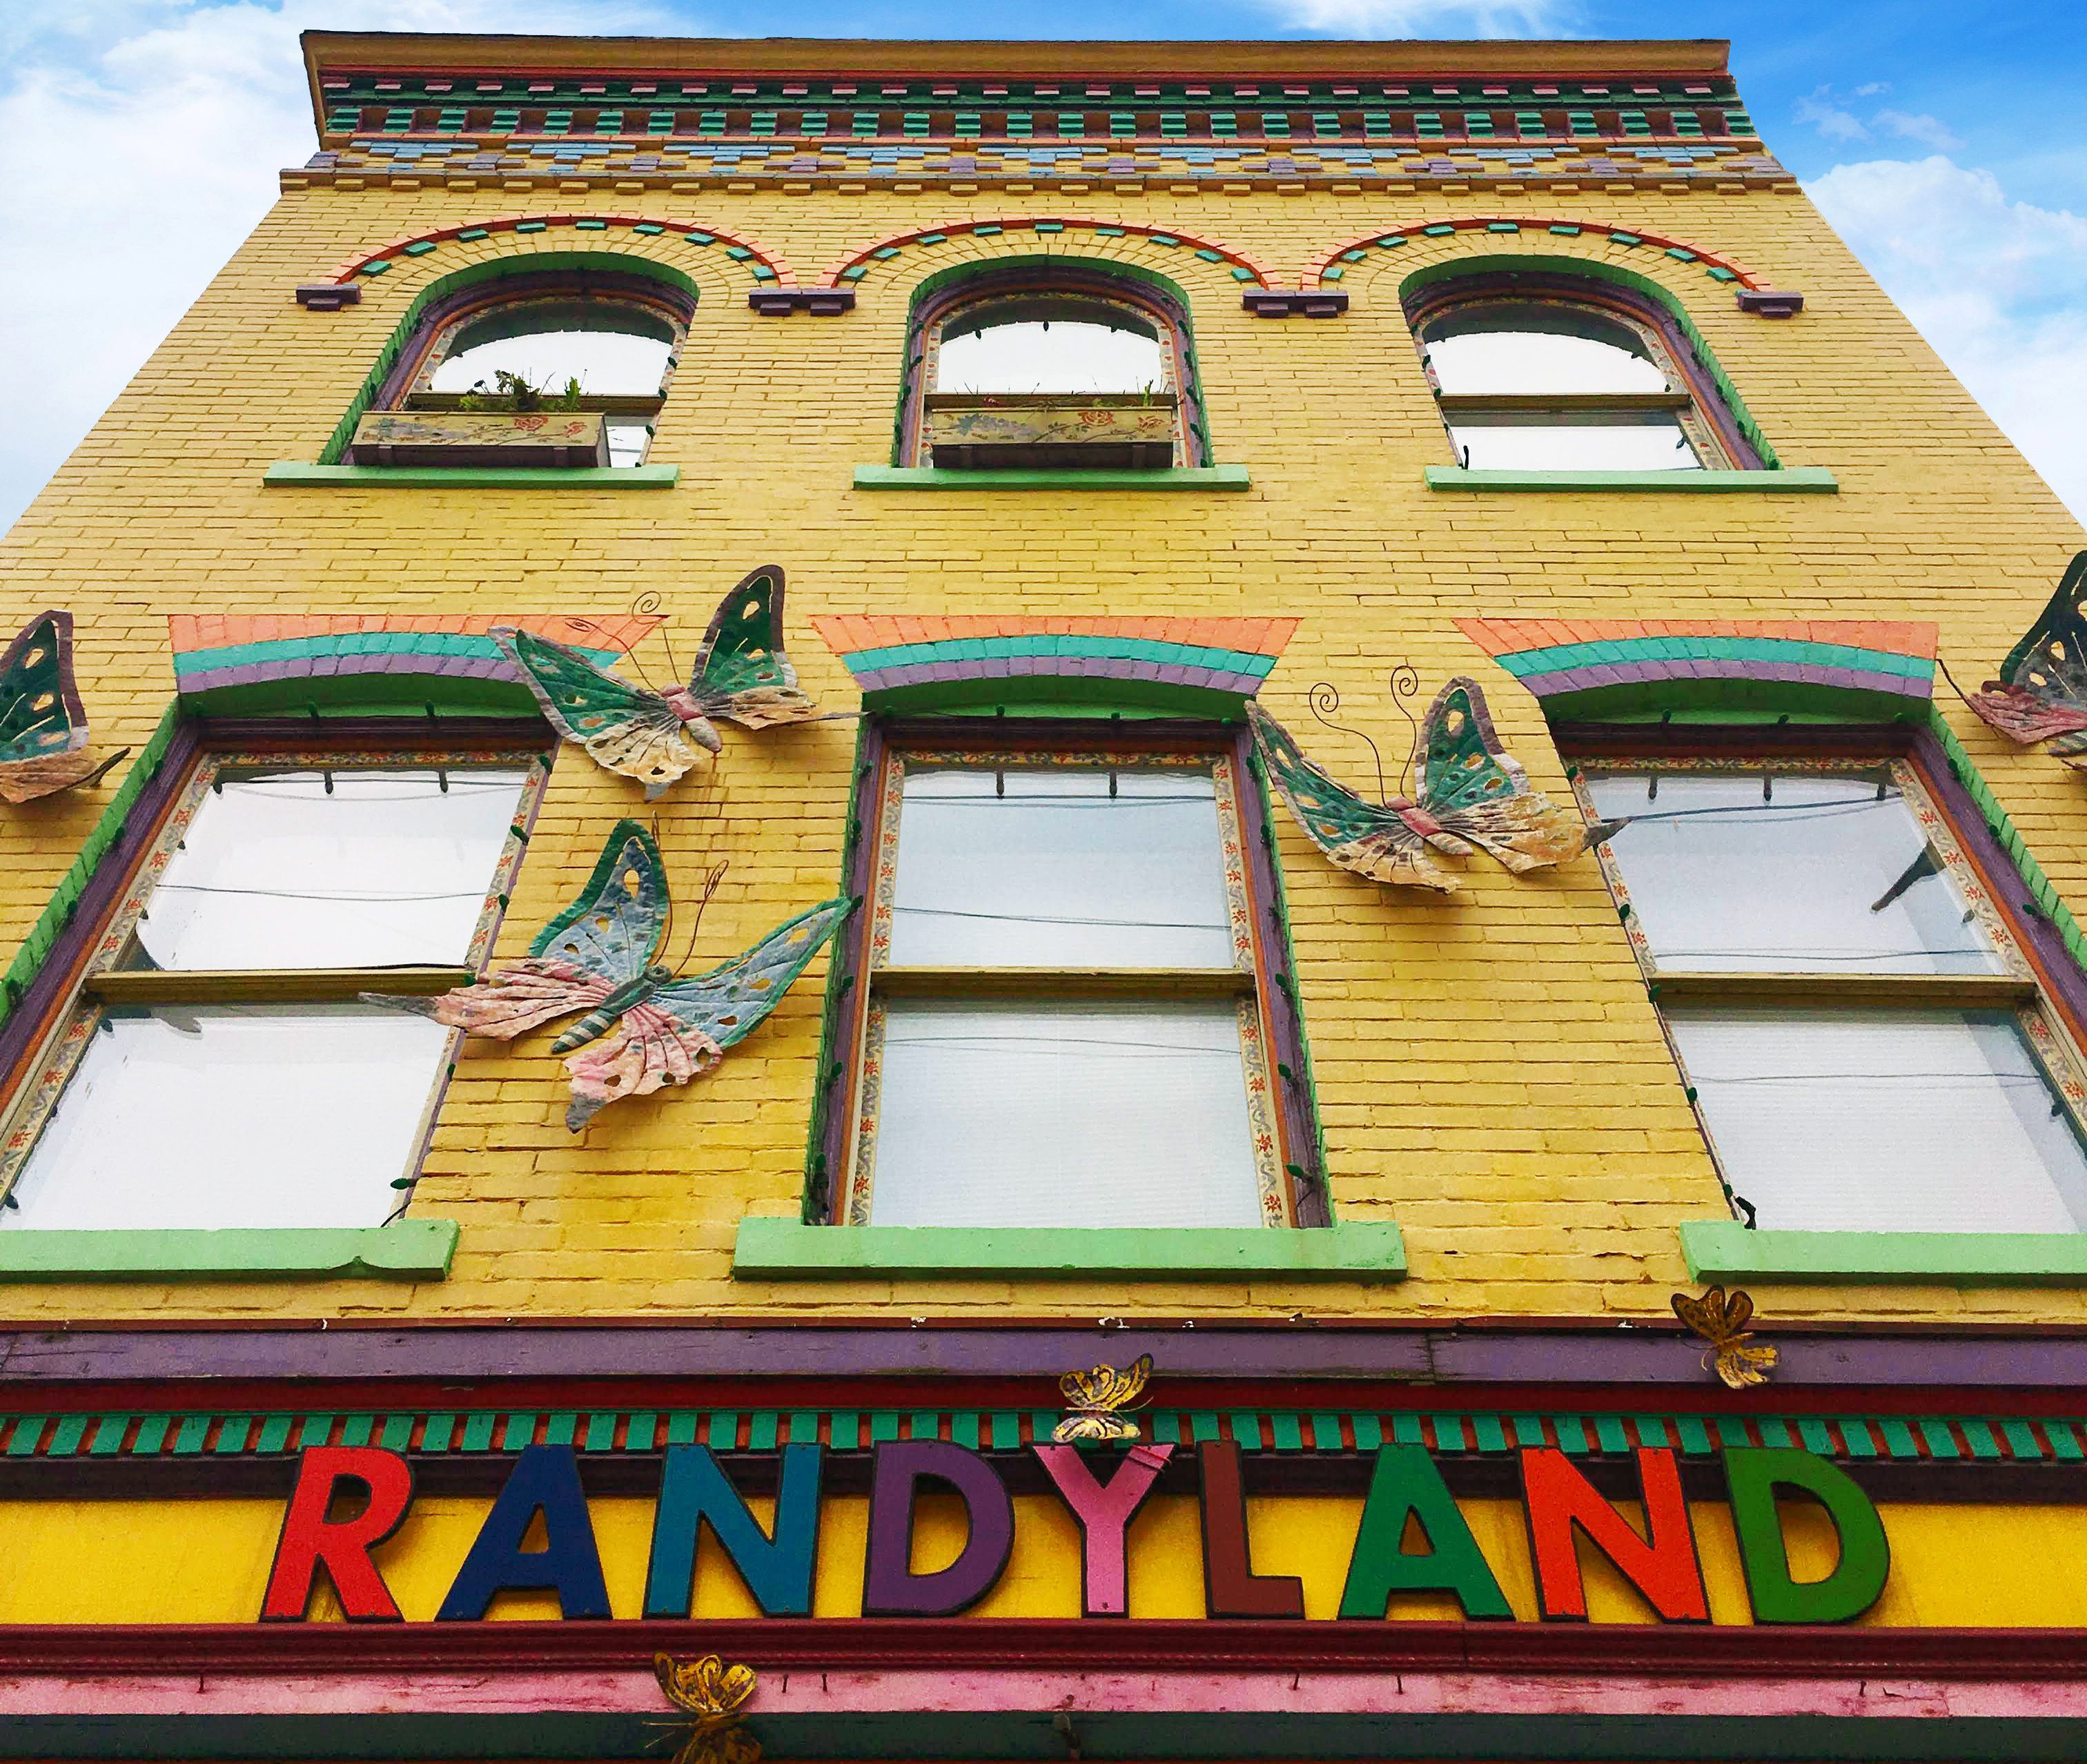 Randy Gilson, the artist who owns and maintains Randyland in Pittsburgh, PA, opens his oasis to the public every day of the week, 10am-7pm, for free.